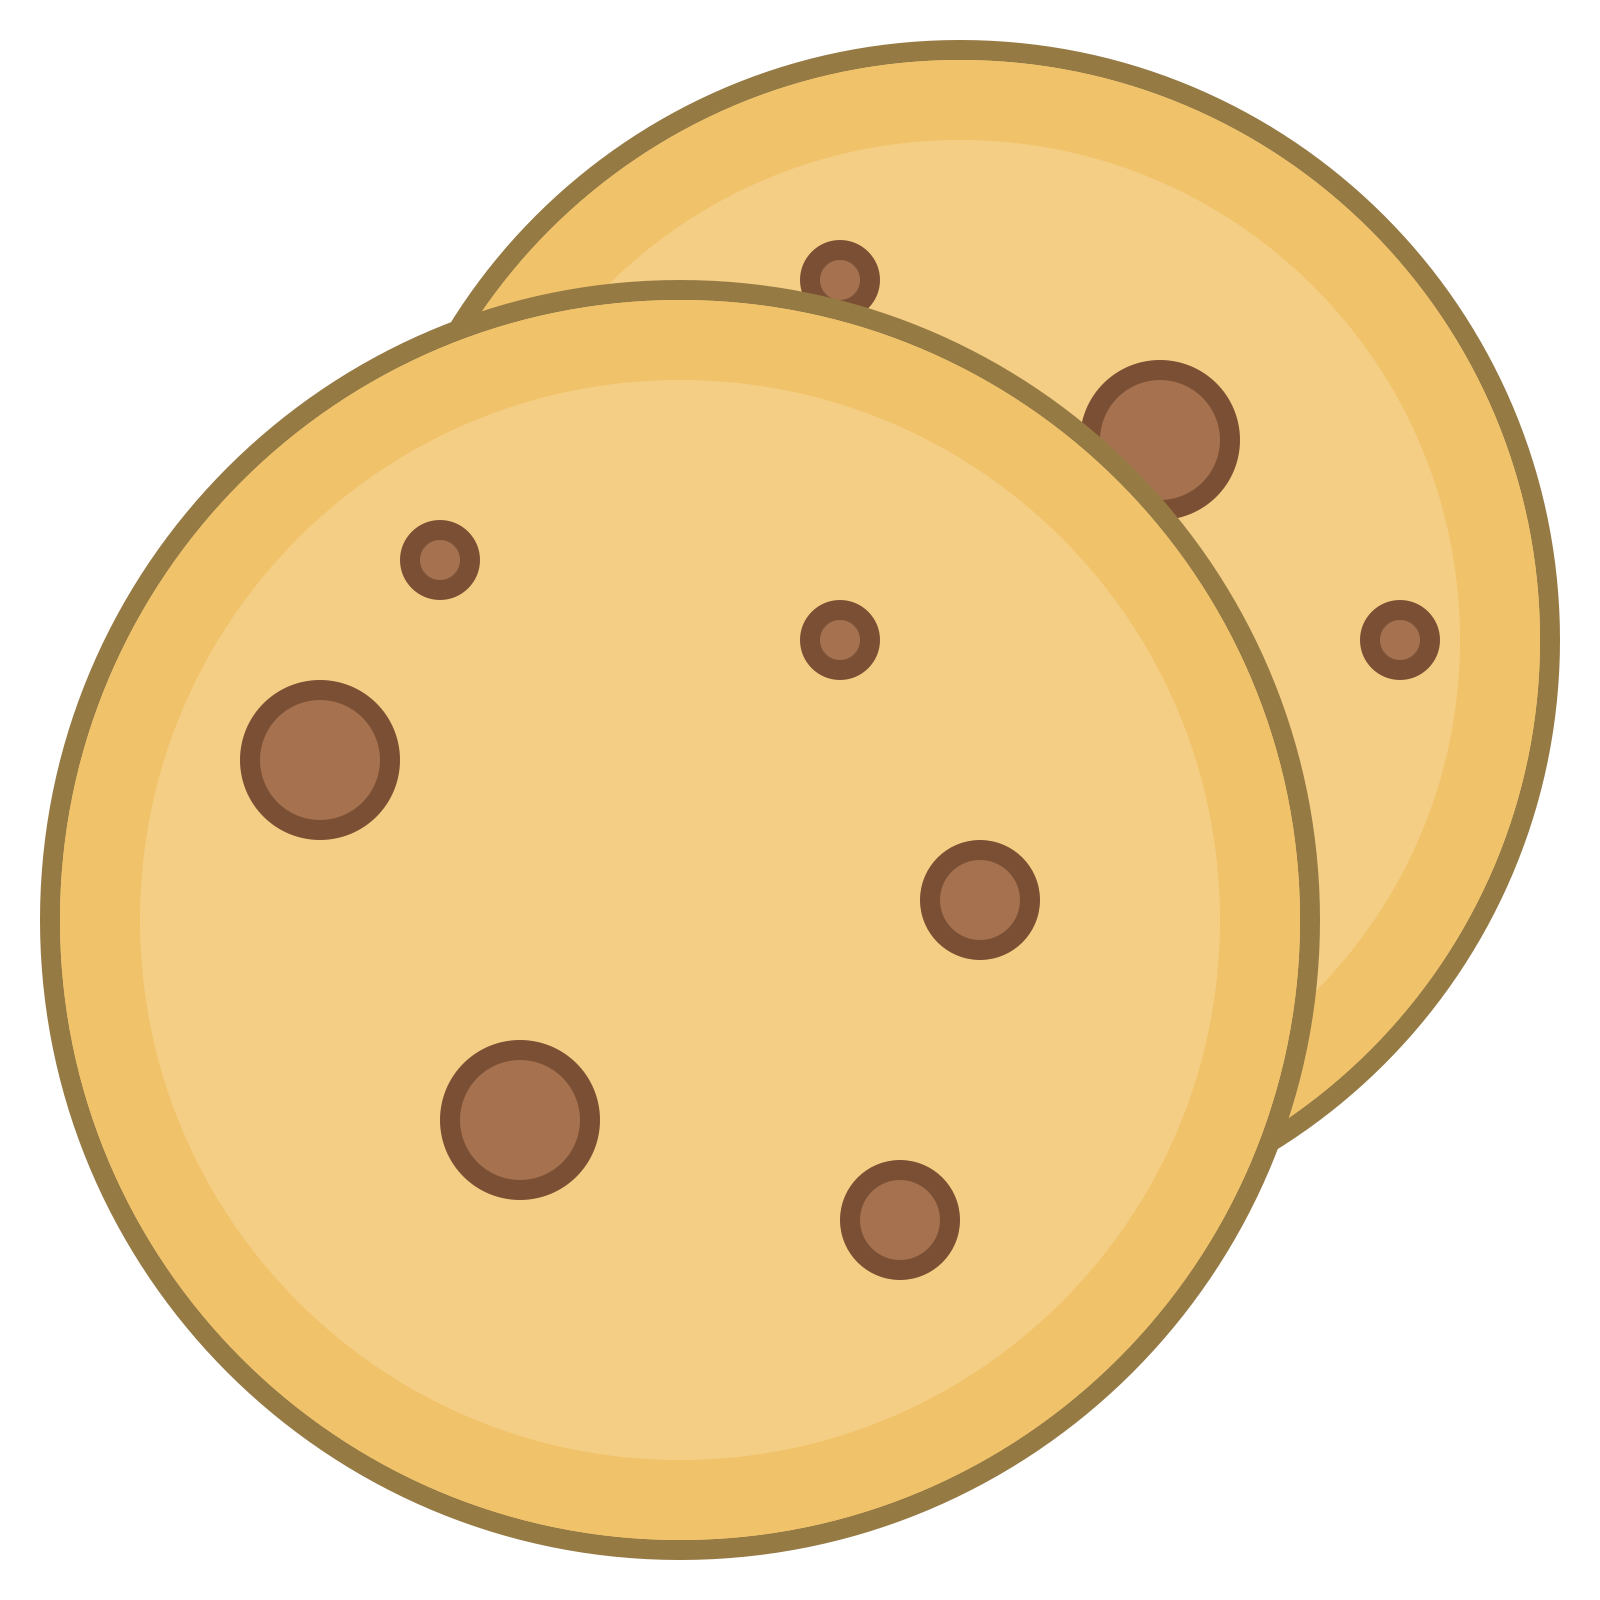 It Is An Image Of Two Overlapping Cookies. The Cookie In The Foreground Is A. Png 64 Px - Kekse, Transparent background PNG HD thumbnail